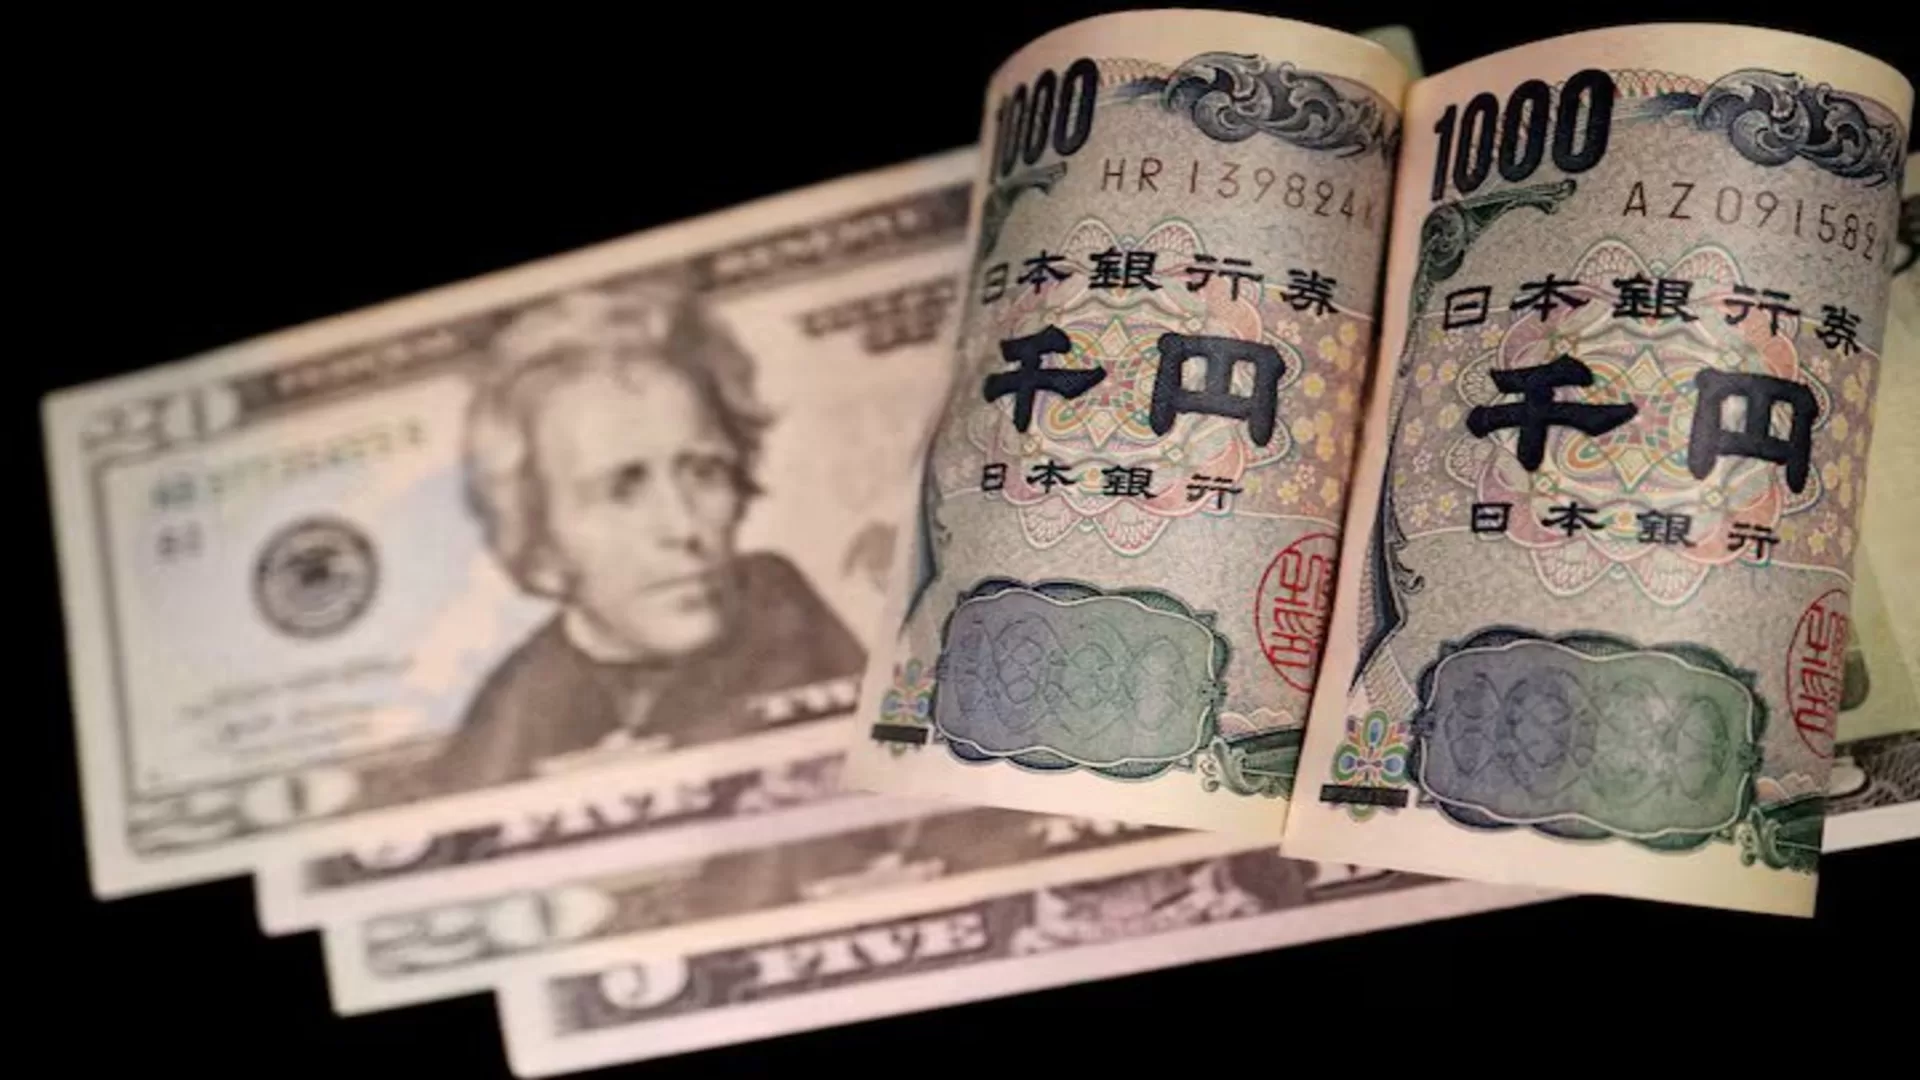 "Japanese Yen Surges: Intervention Signals Shift in Currency Dynamics"